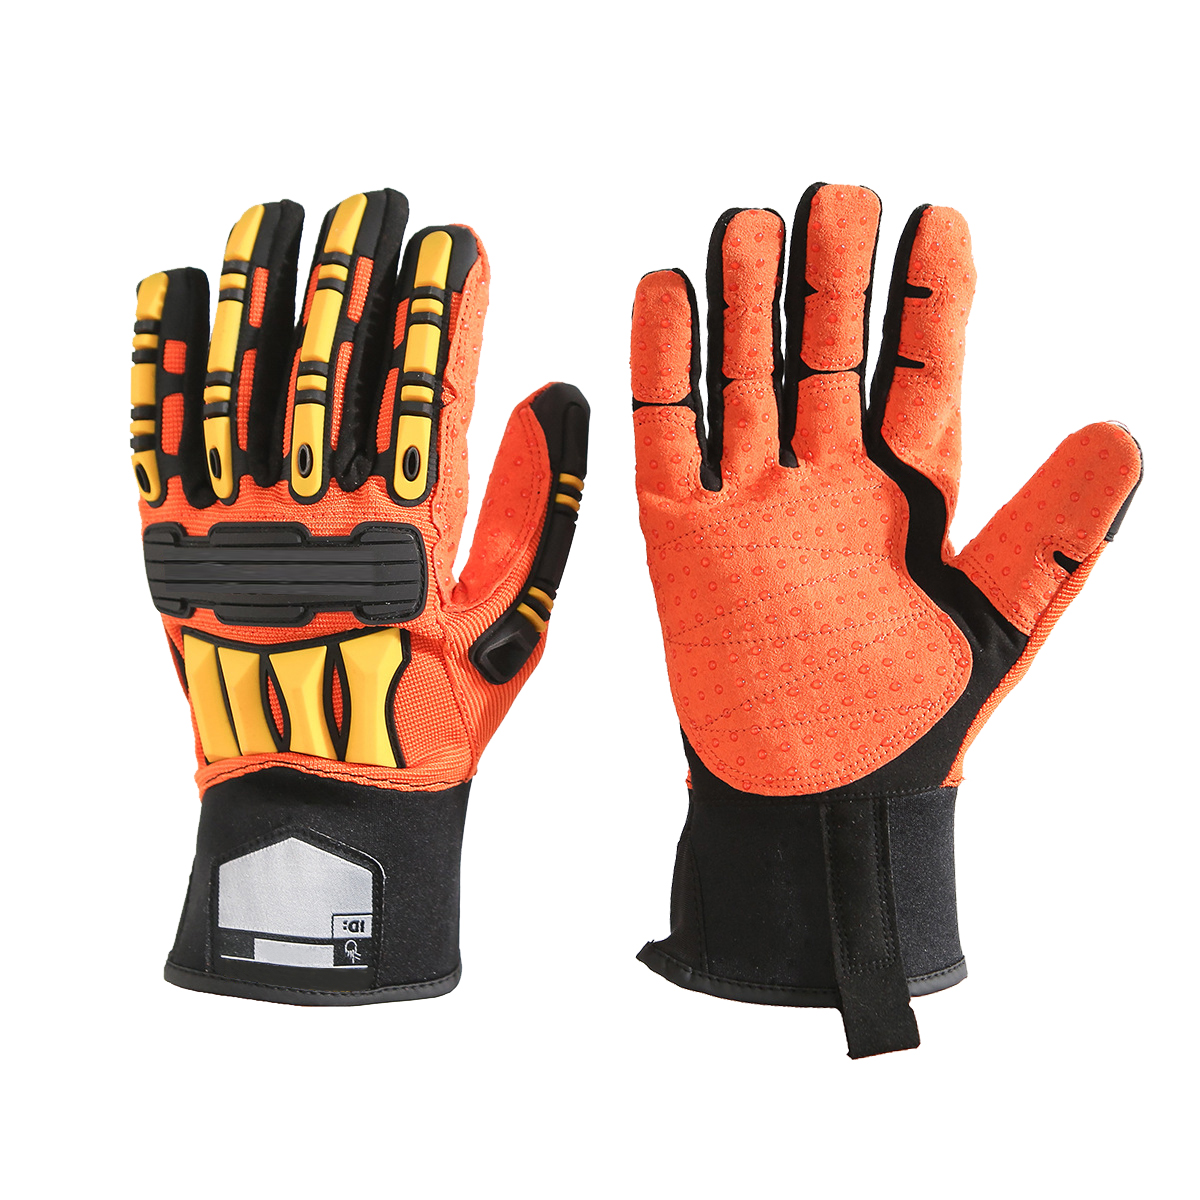 Impact Foam Nitrile Palm Tpr Gloves with Back Hand Protection